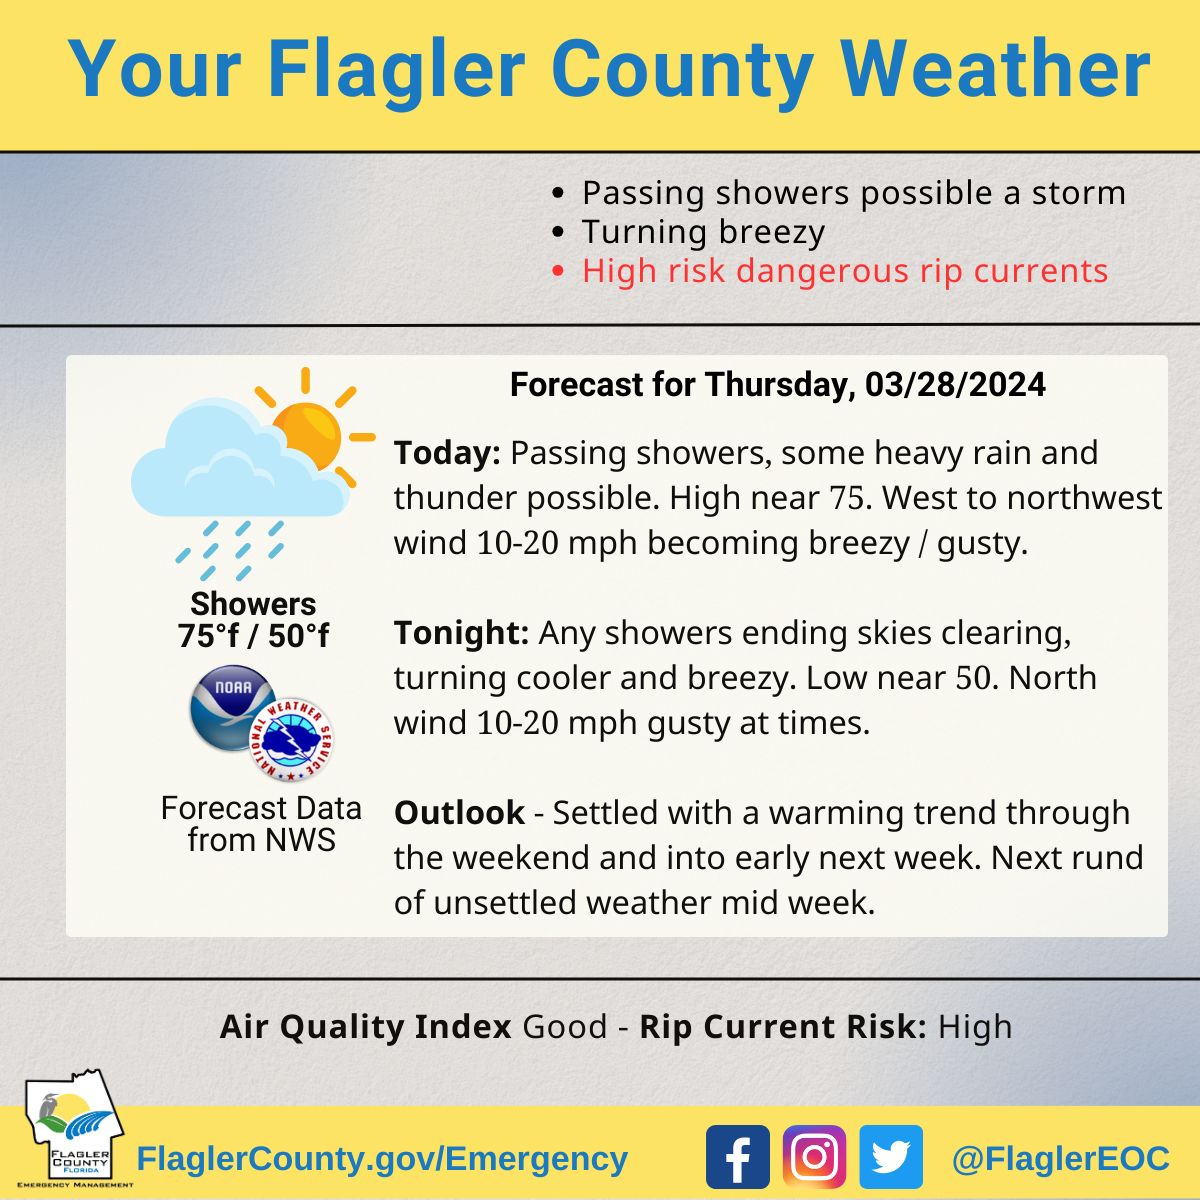 Our local weather forecast from the National Weather Service. For updates visit buff.ly/44yGZJ8 Sign up for free weather alerts at buff.ly/3r4z0Gl #FlaglerWeather #FlaglerCounty #WeatherAlert